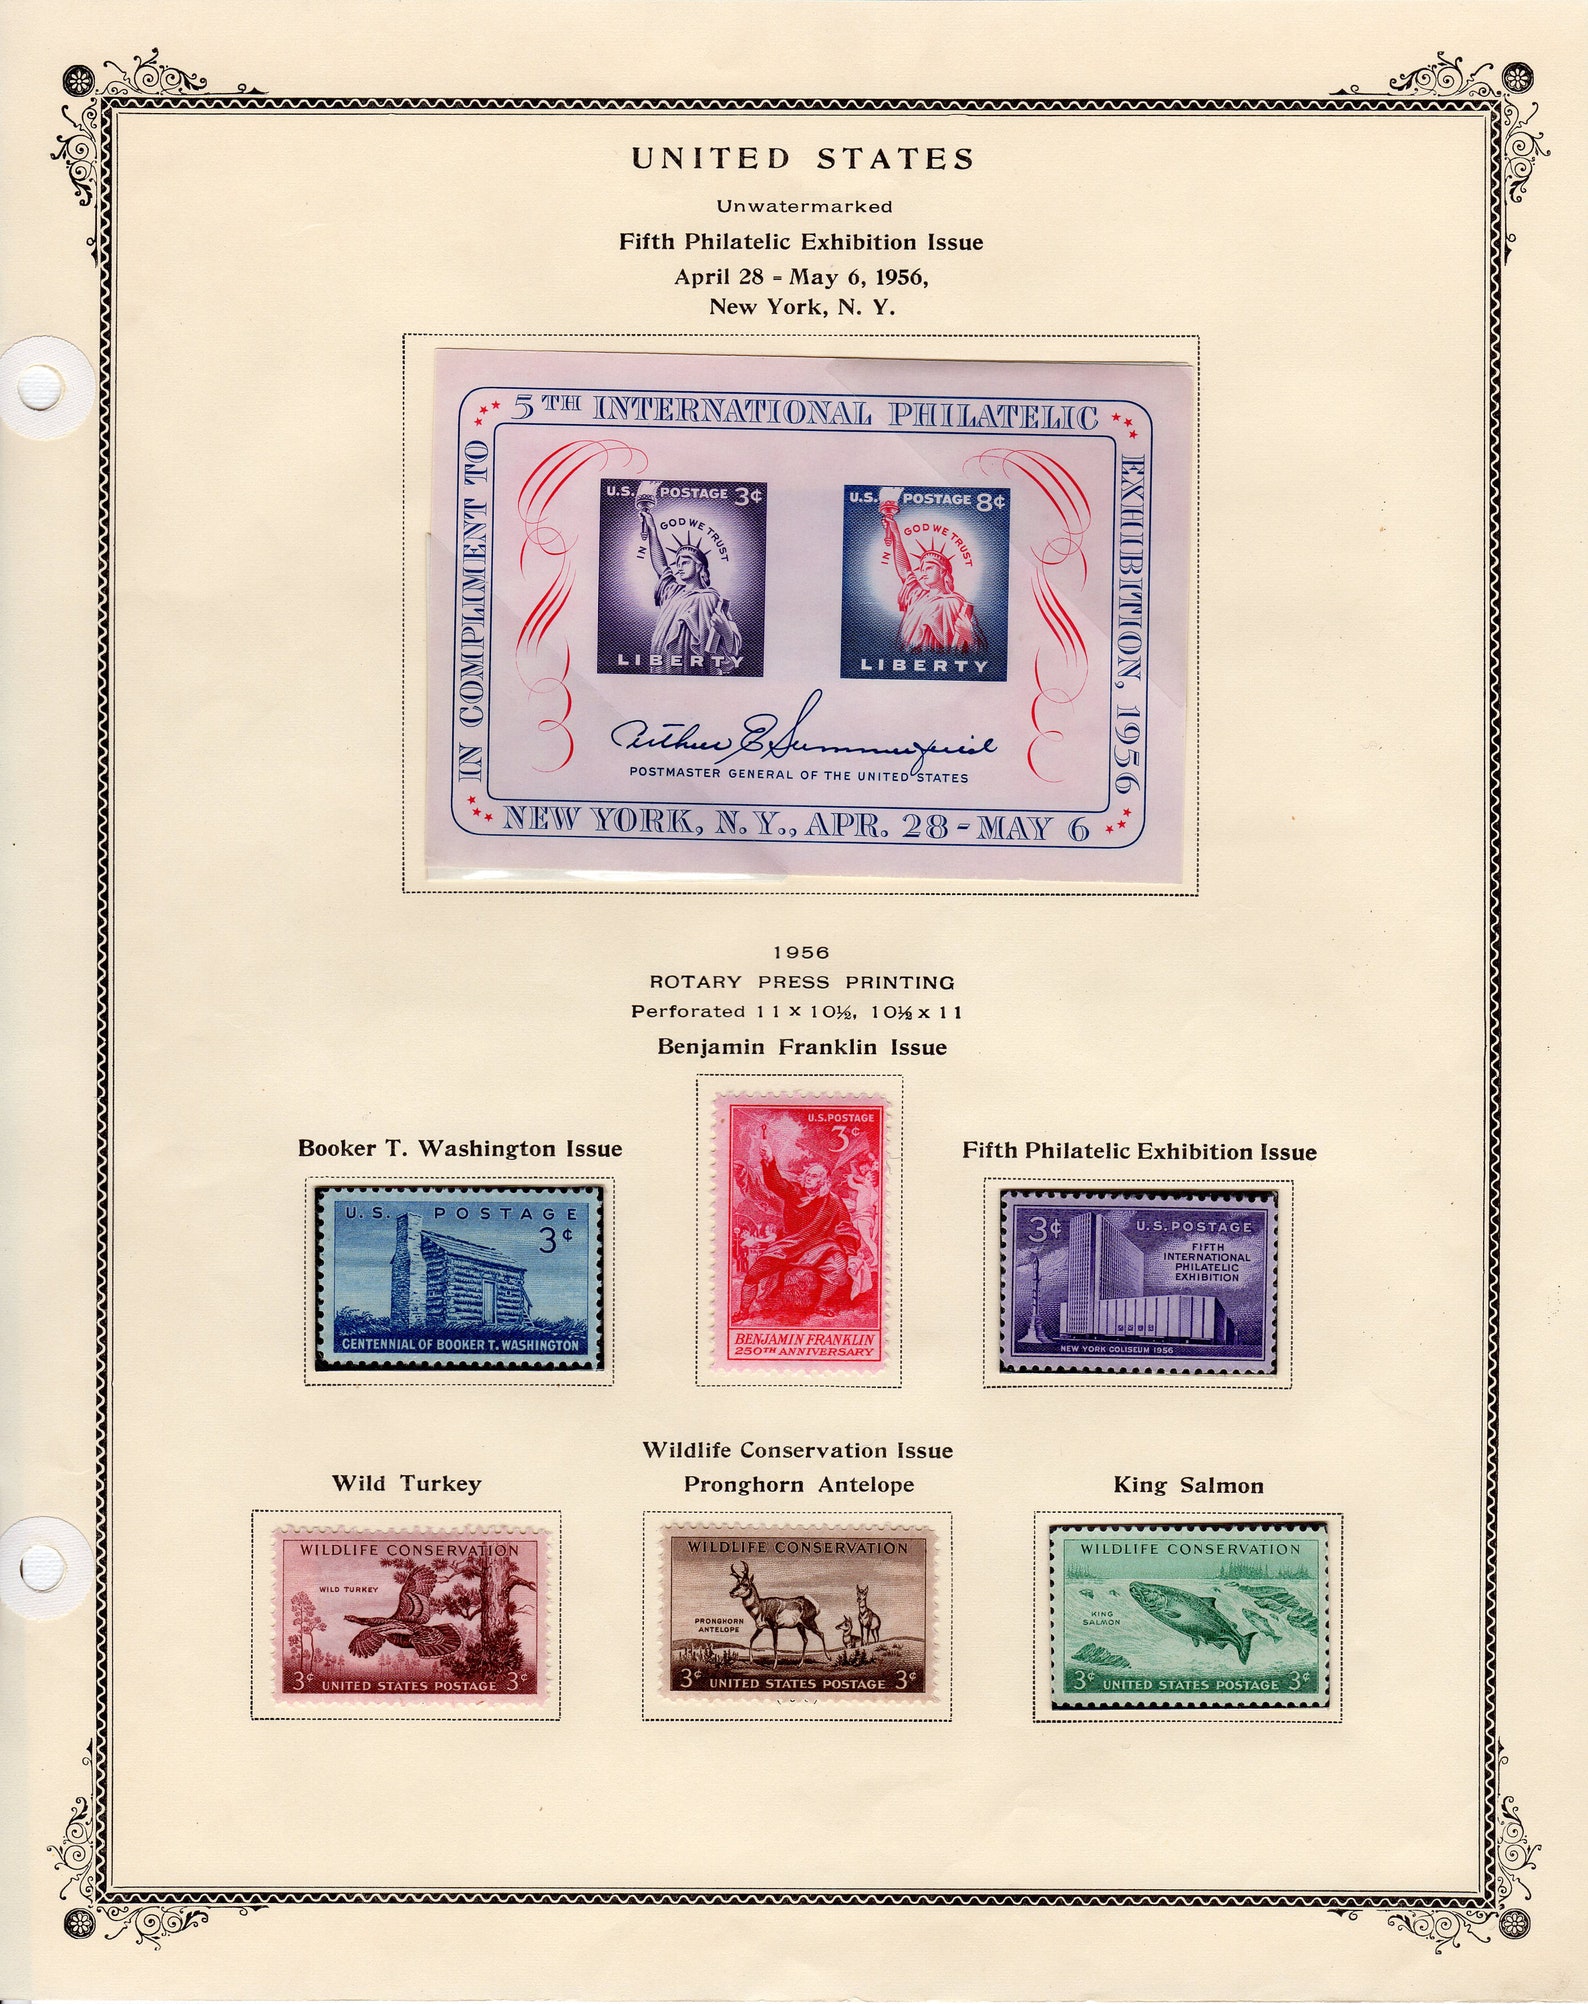 lot-of-11-completed-united-states-postage-stamp-album-pages-postal-mail